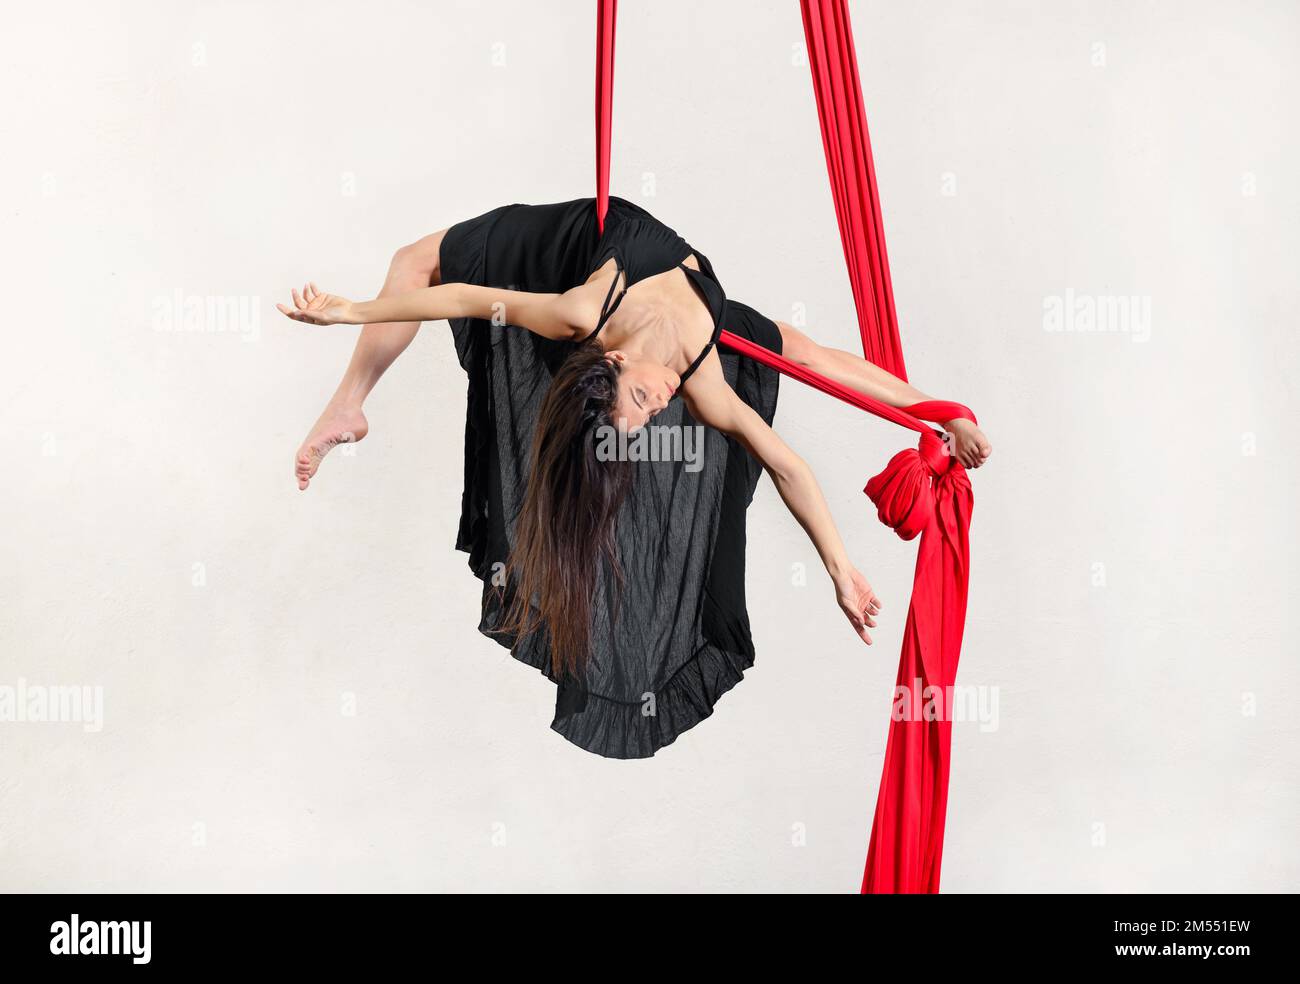 Full body of graceful barefooted young female dancer performing arch on hanging red aerial silks against white background Stock Photo